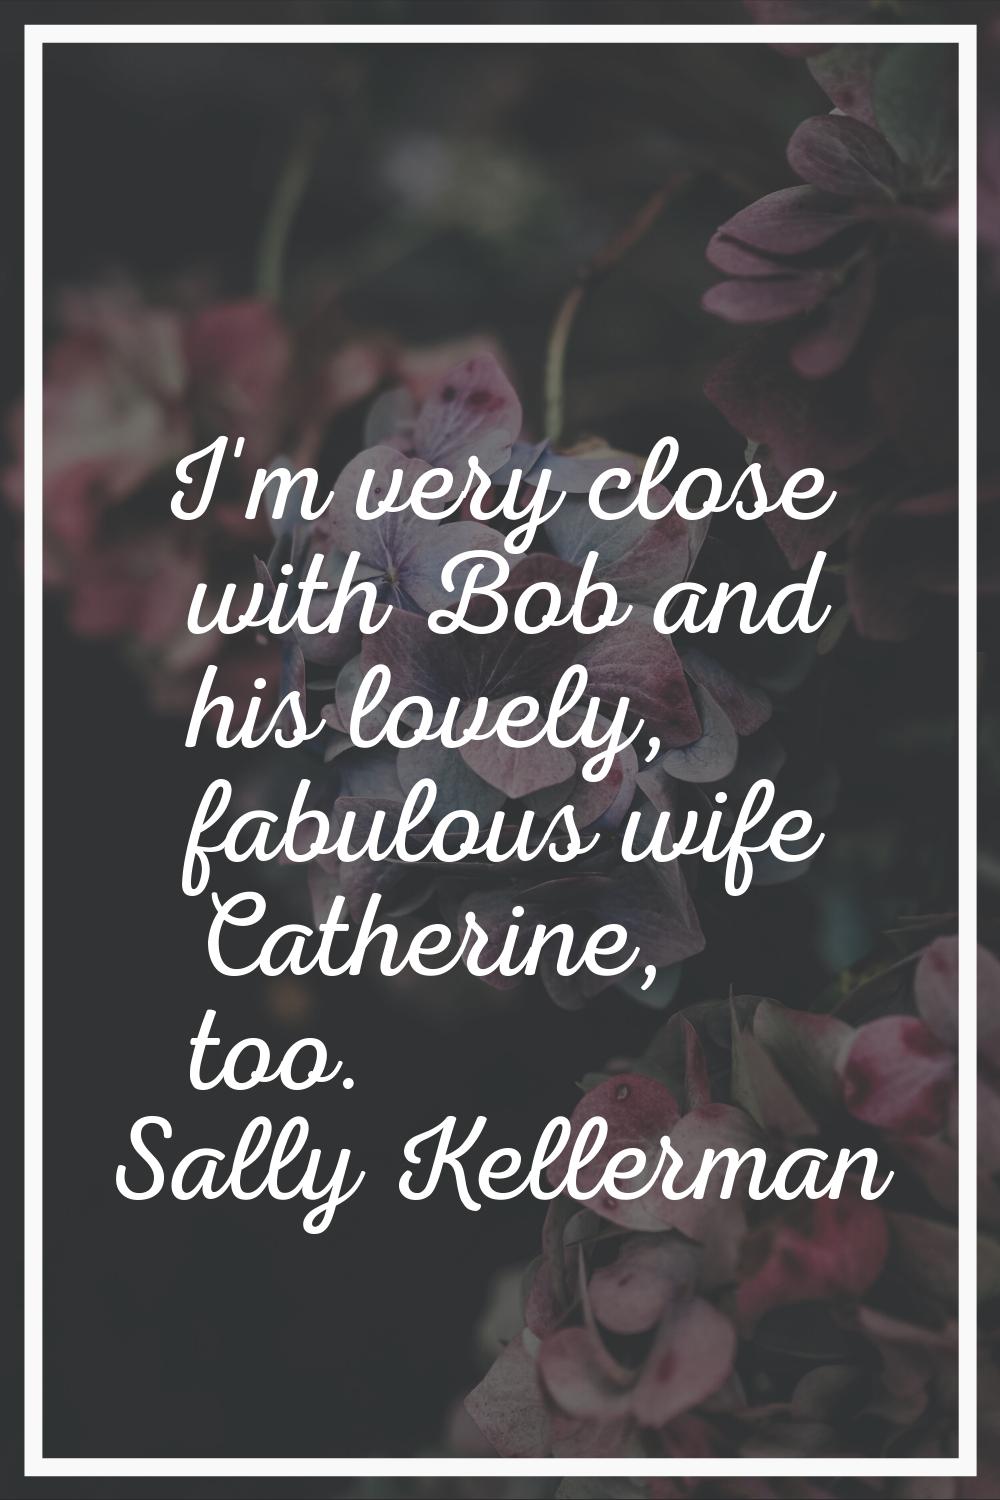 I'm very close with Bob and his lovely, fabulous wife Catherine, too.